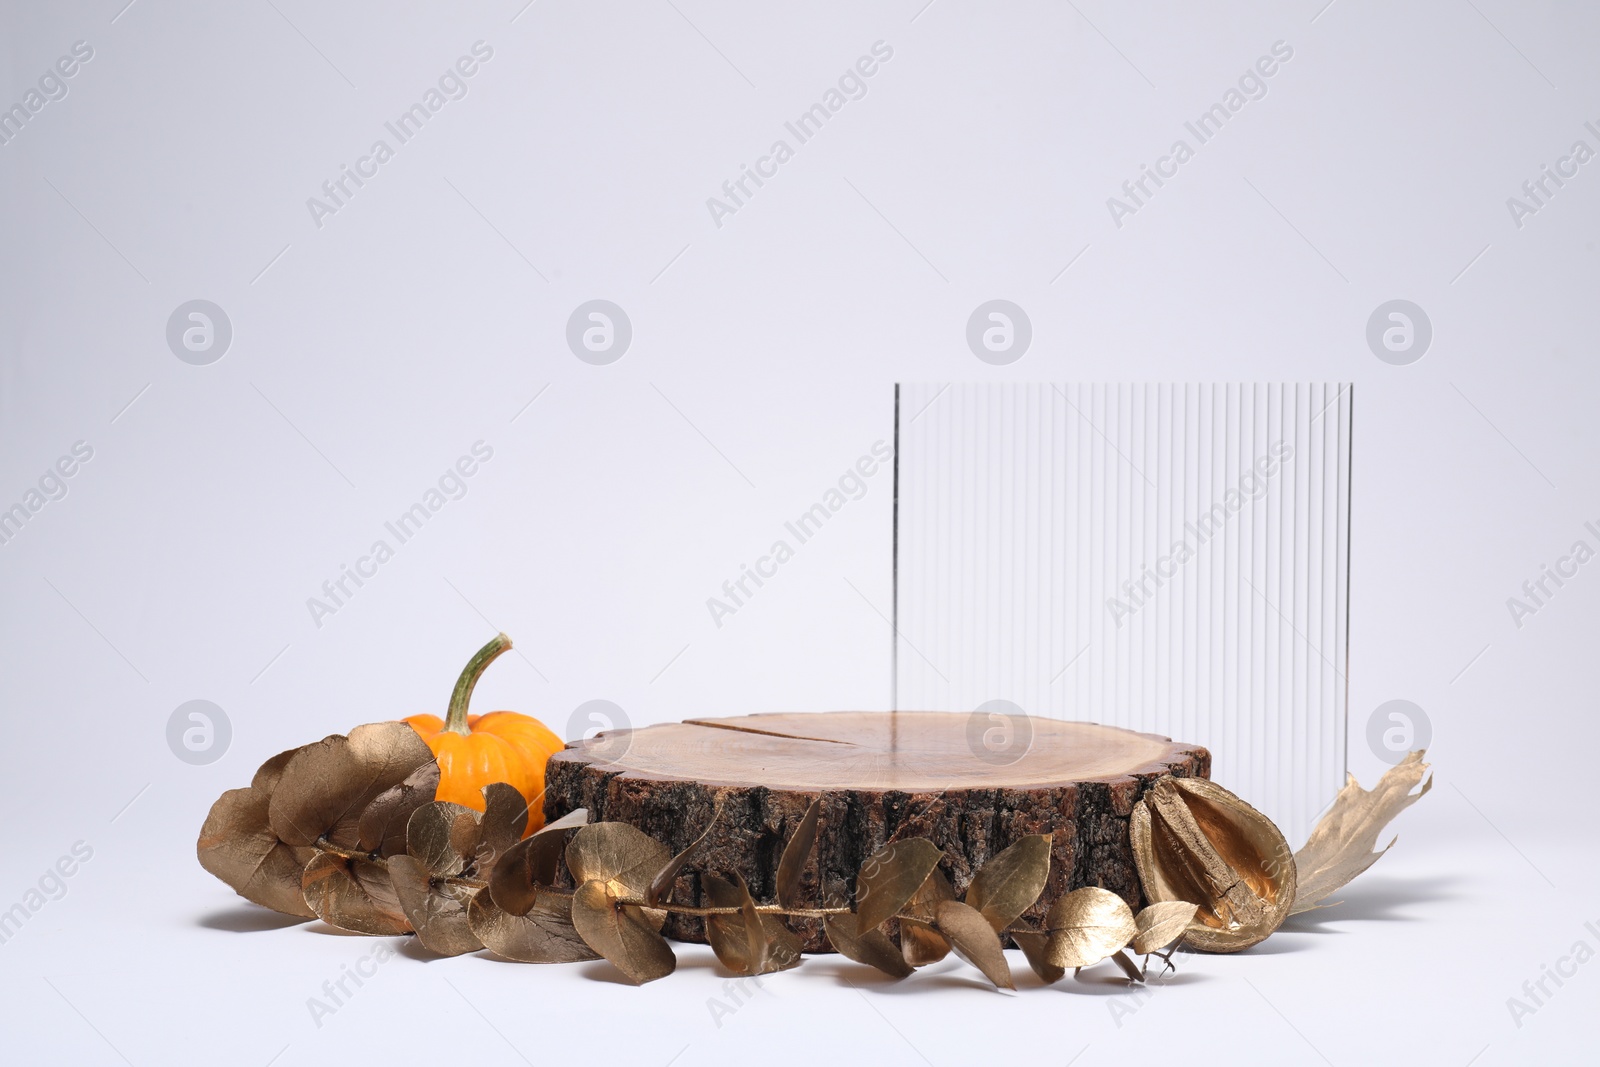 Photo of Autumn presentation for product. Wooden stump, geometric figure, pumpkin and golden branch with leaves on white background